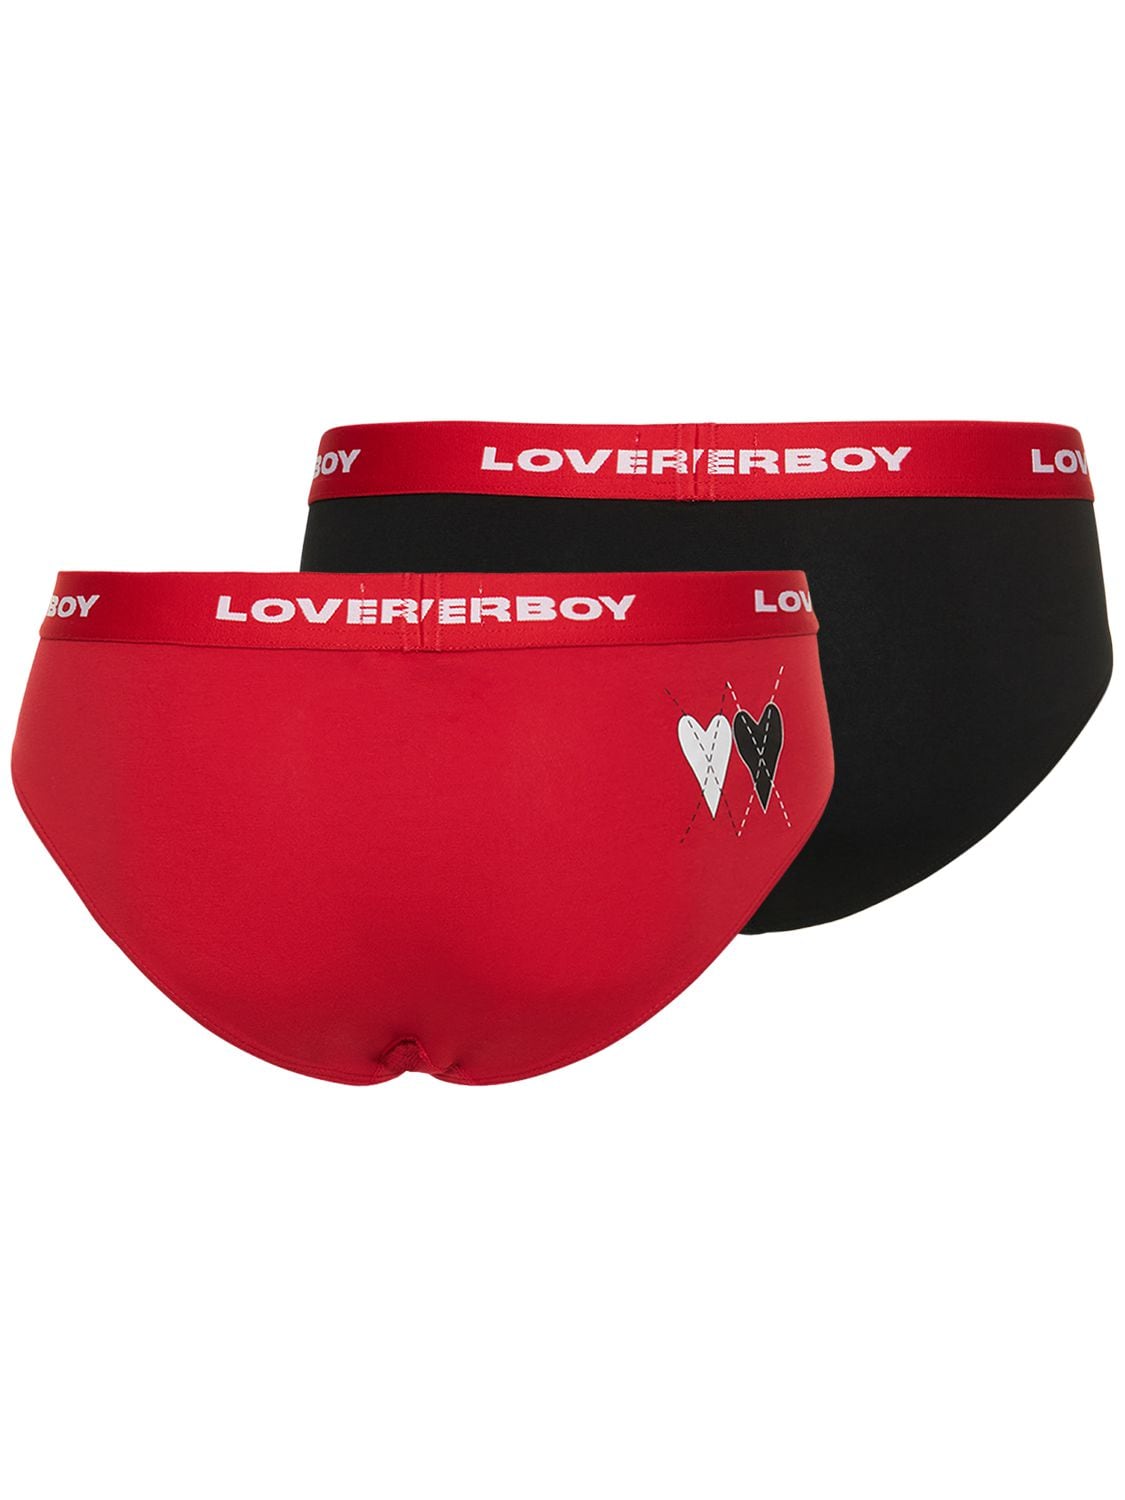 Charles Jeffrey Loverboy Pack Of 2 Logo Cotton Stretch Briefs In Black,red